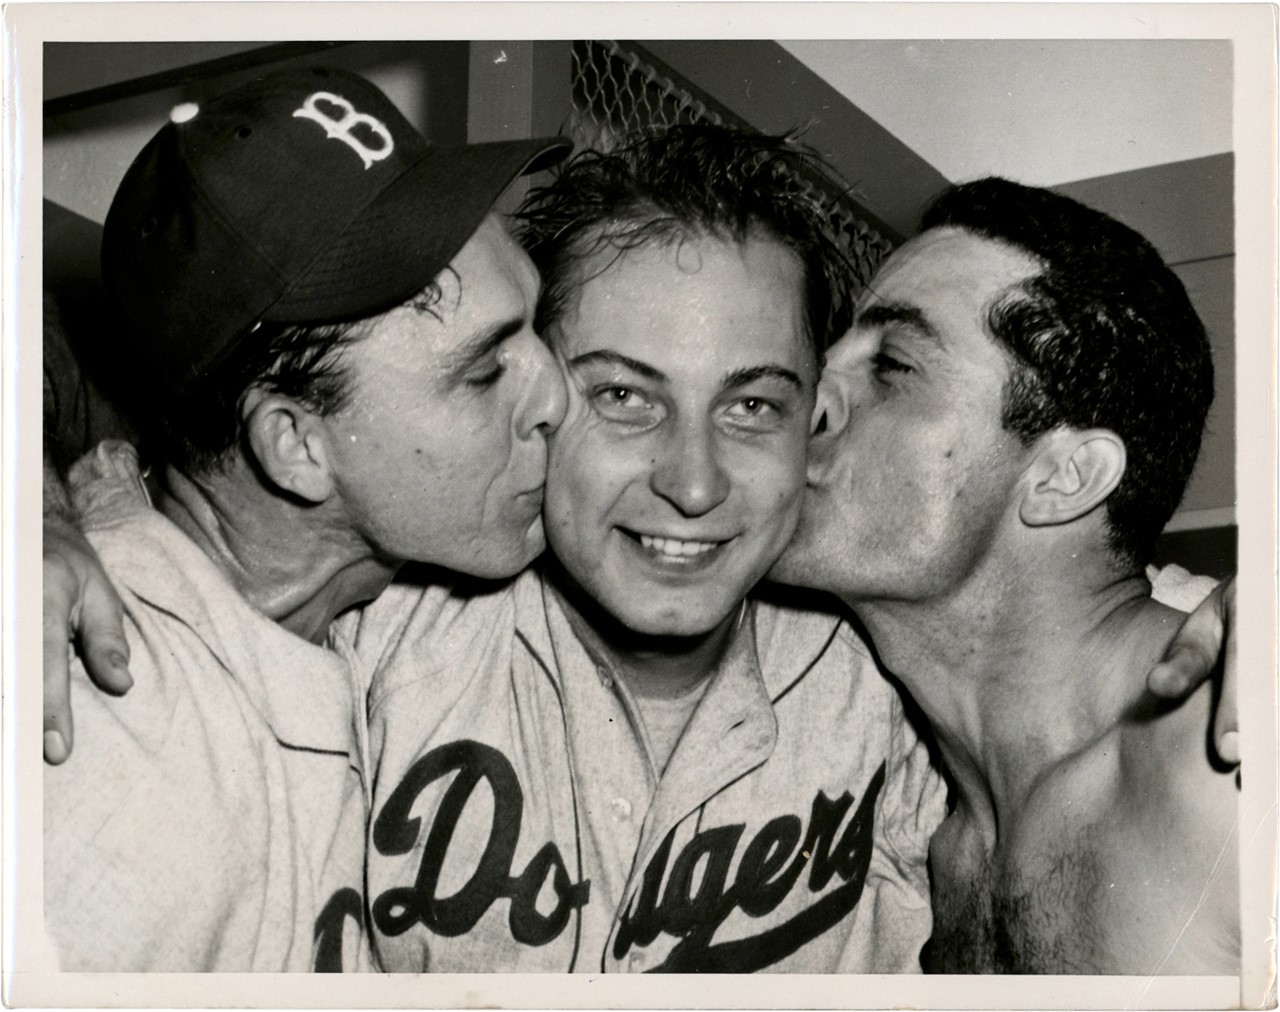 The Brown Brothers Collection - Brooklyn Dodgers Celebrate the 1955 World Championship Photograph (PSA Type I)